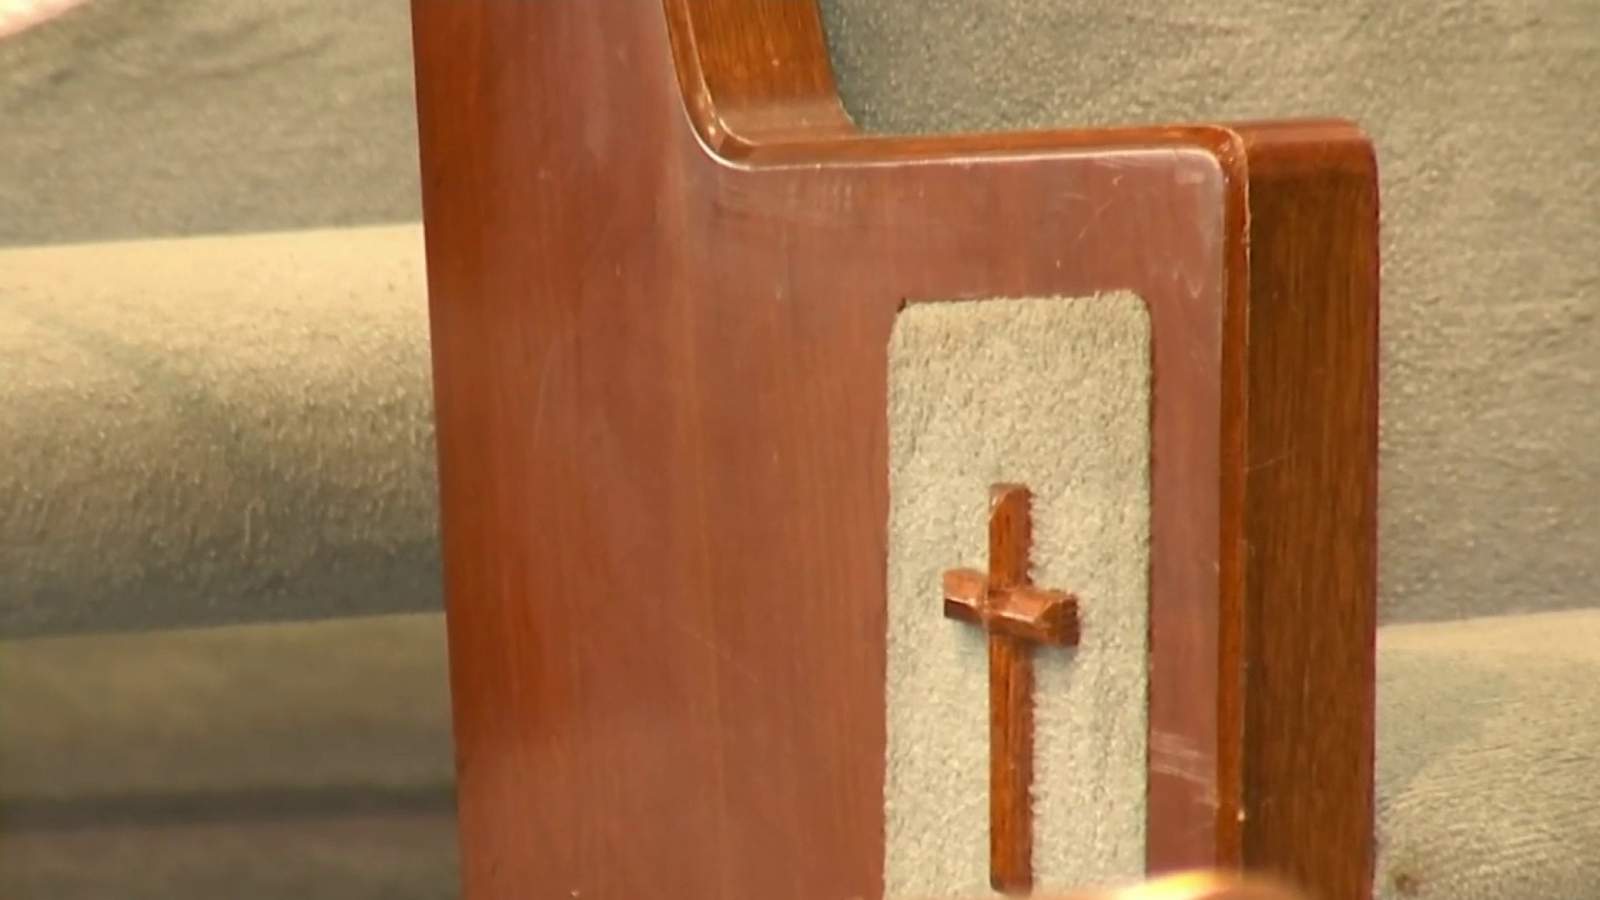 Churches make safety preparations for Easter services to prevent spread of COVID-19